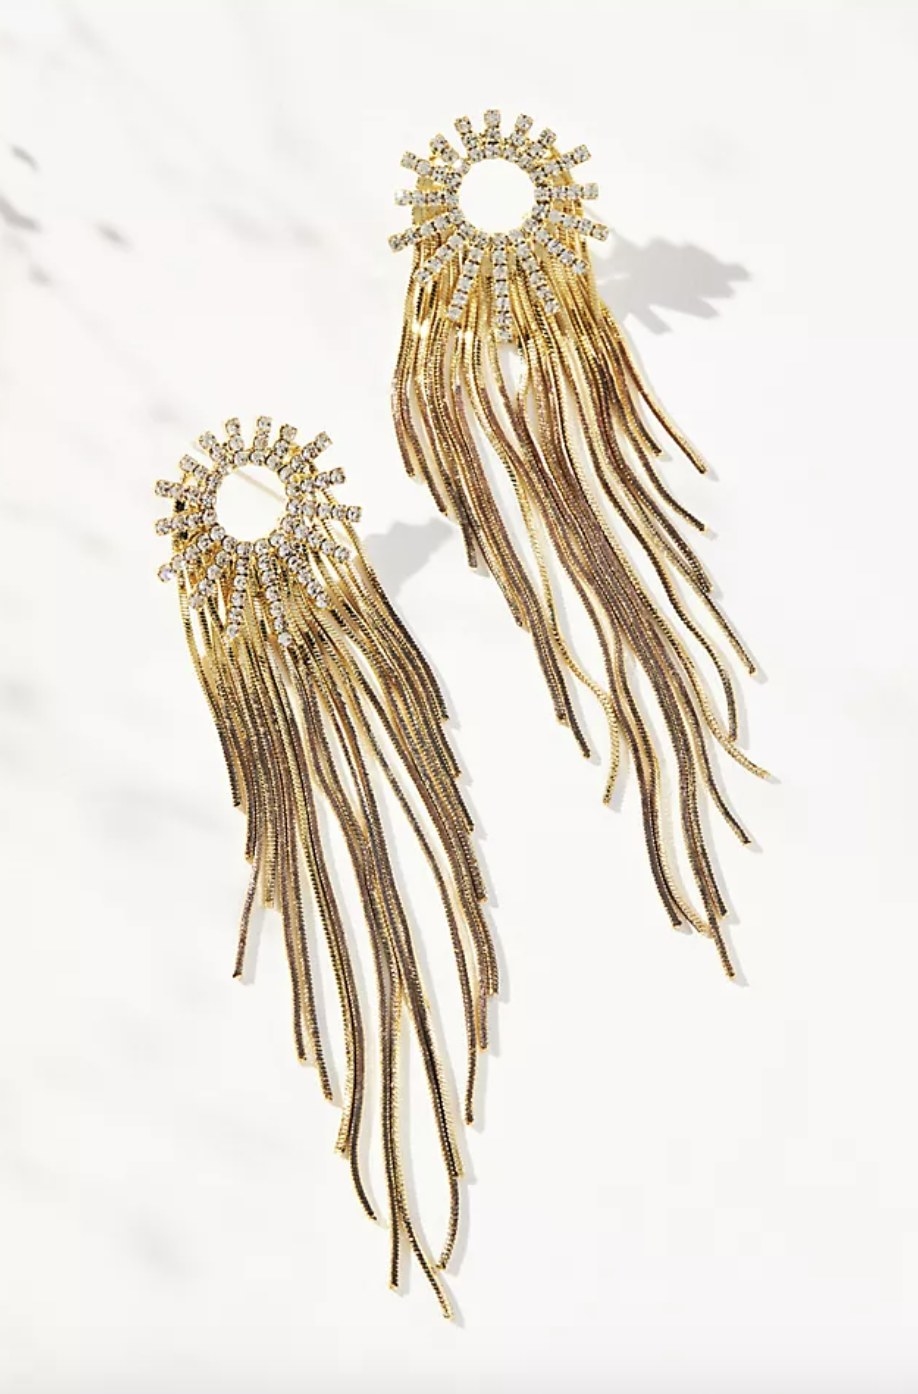 The gold drop earrings have a sun ray base and long dropping arms of gold